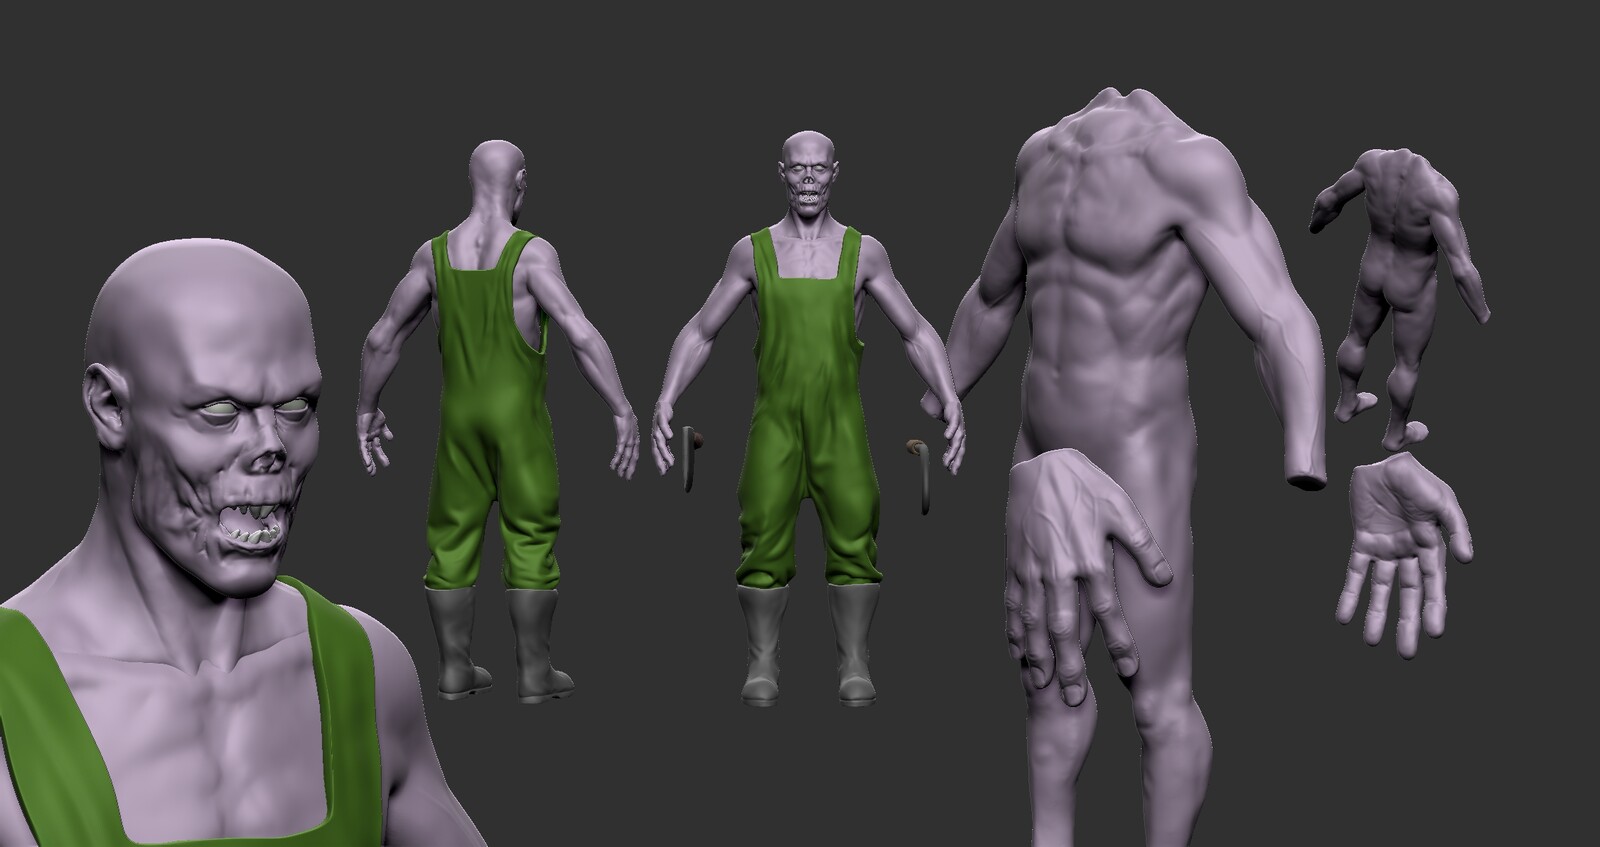 And the never finished 3D model :D